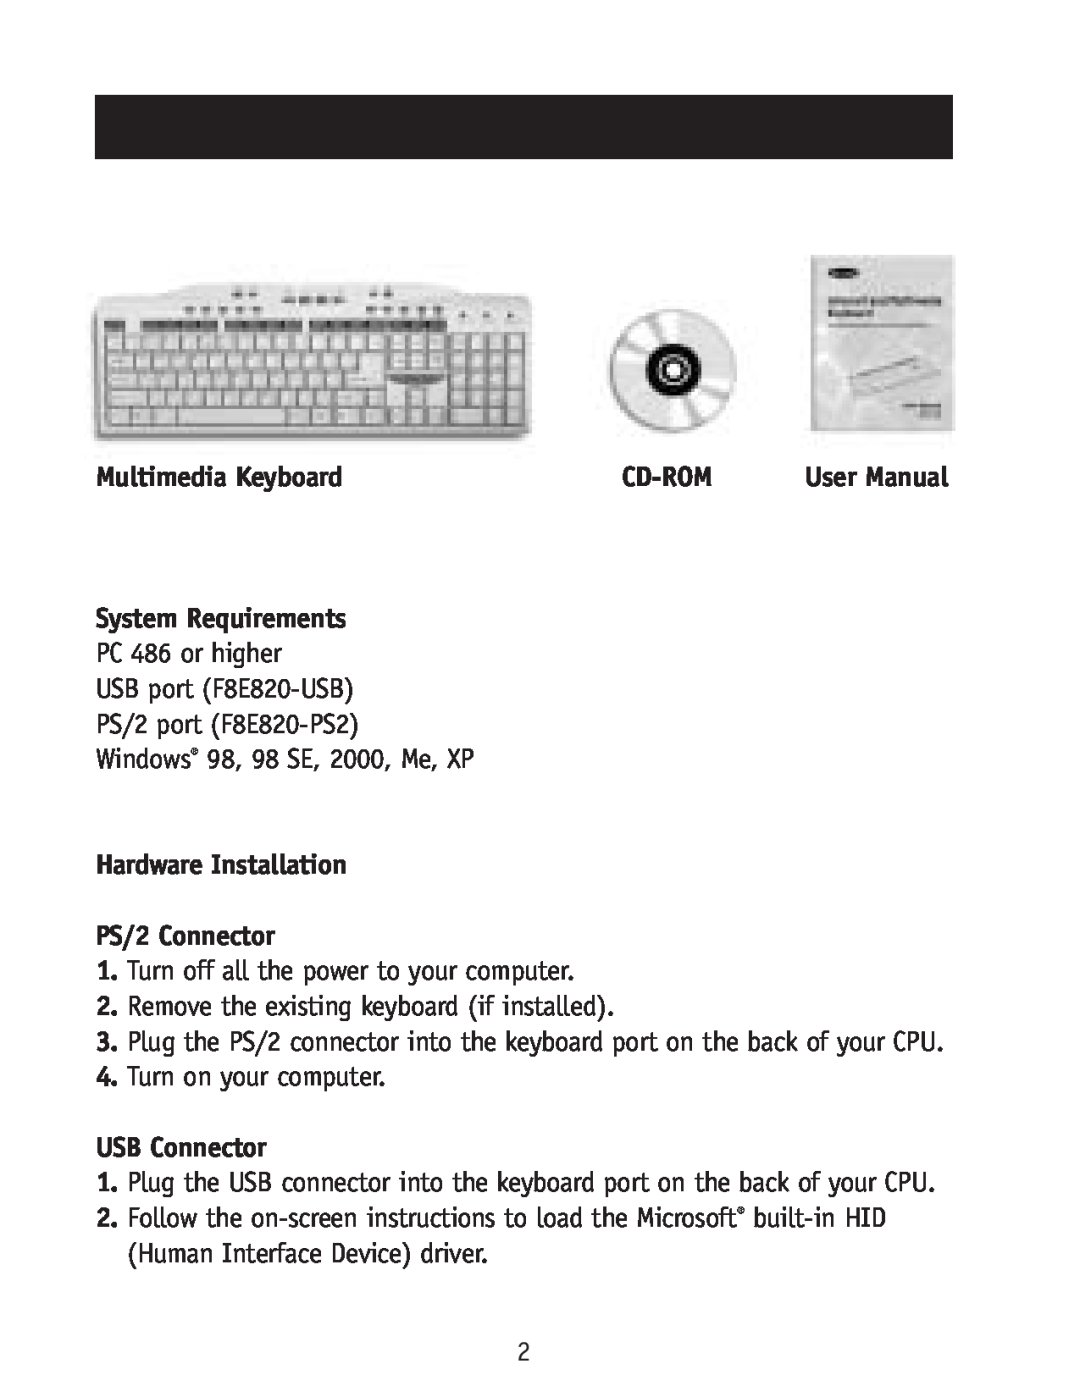 Belkin F8E820-USB Multimedia Keyboard, Cd-Rom, System Requirements, Hardware Installation PS/2 Connector, USB Connector 